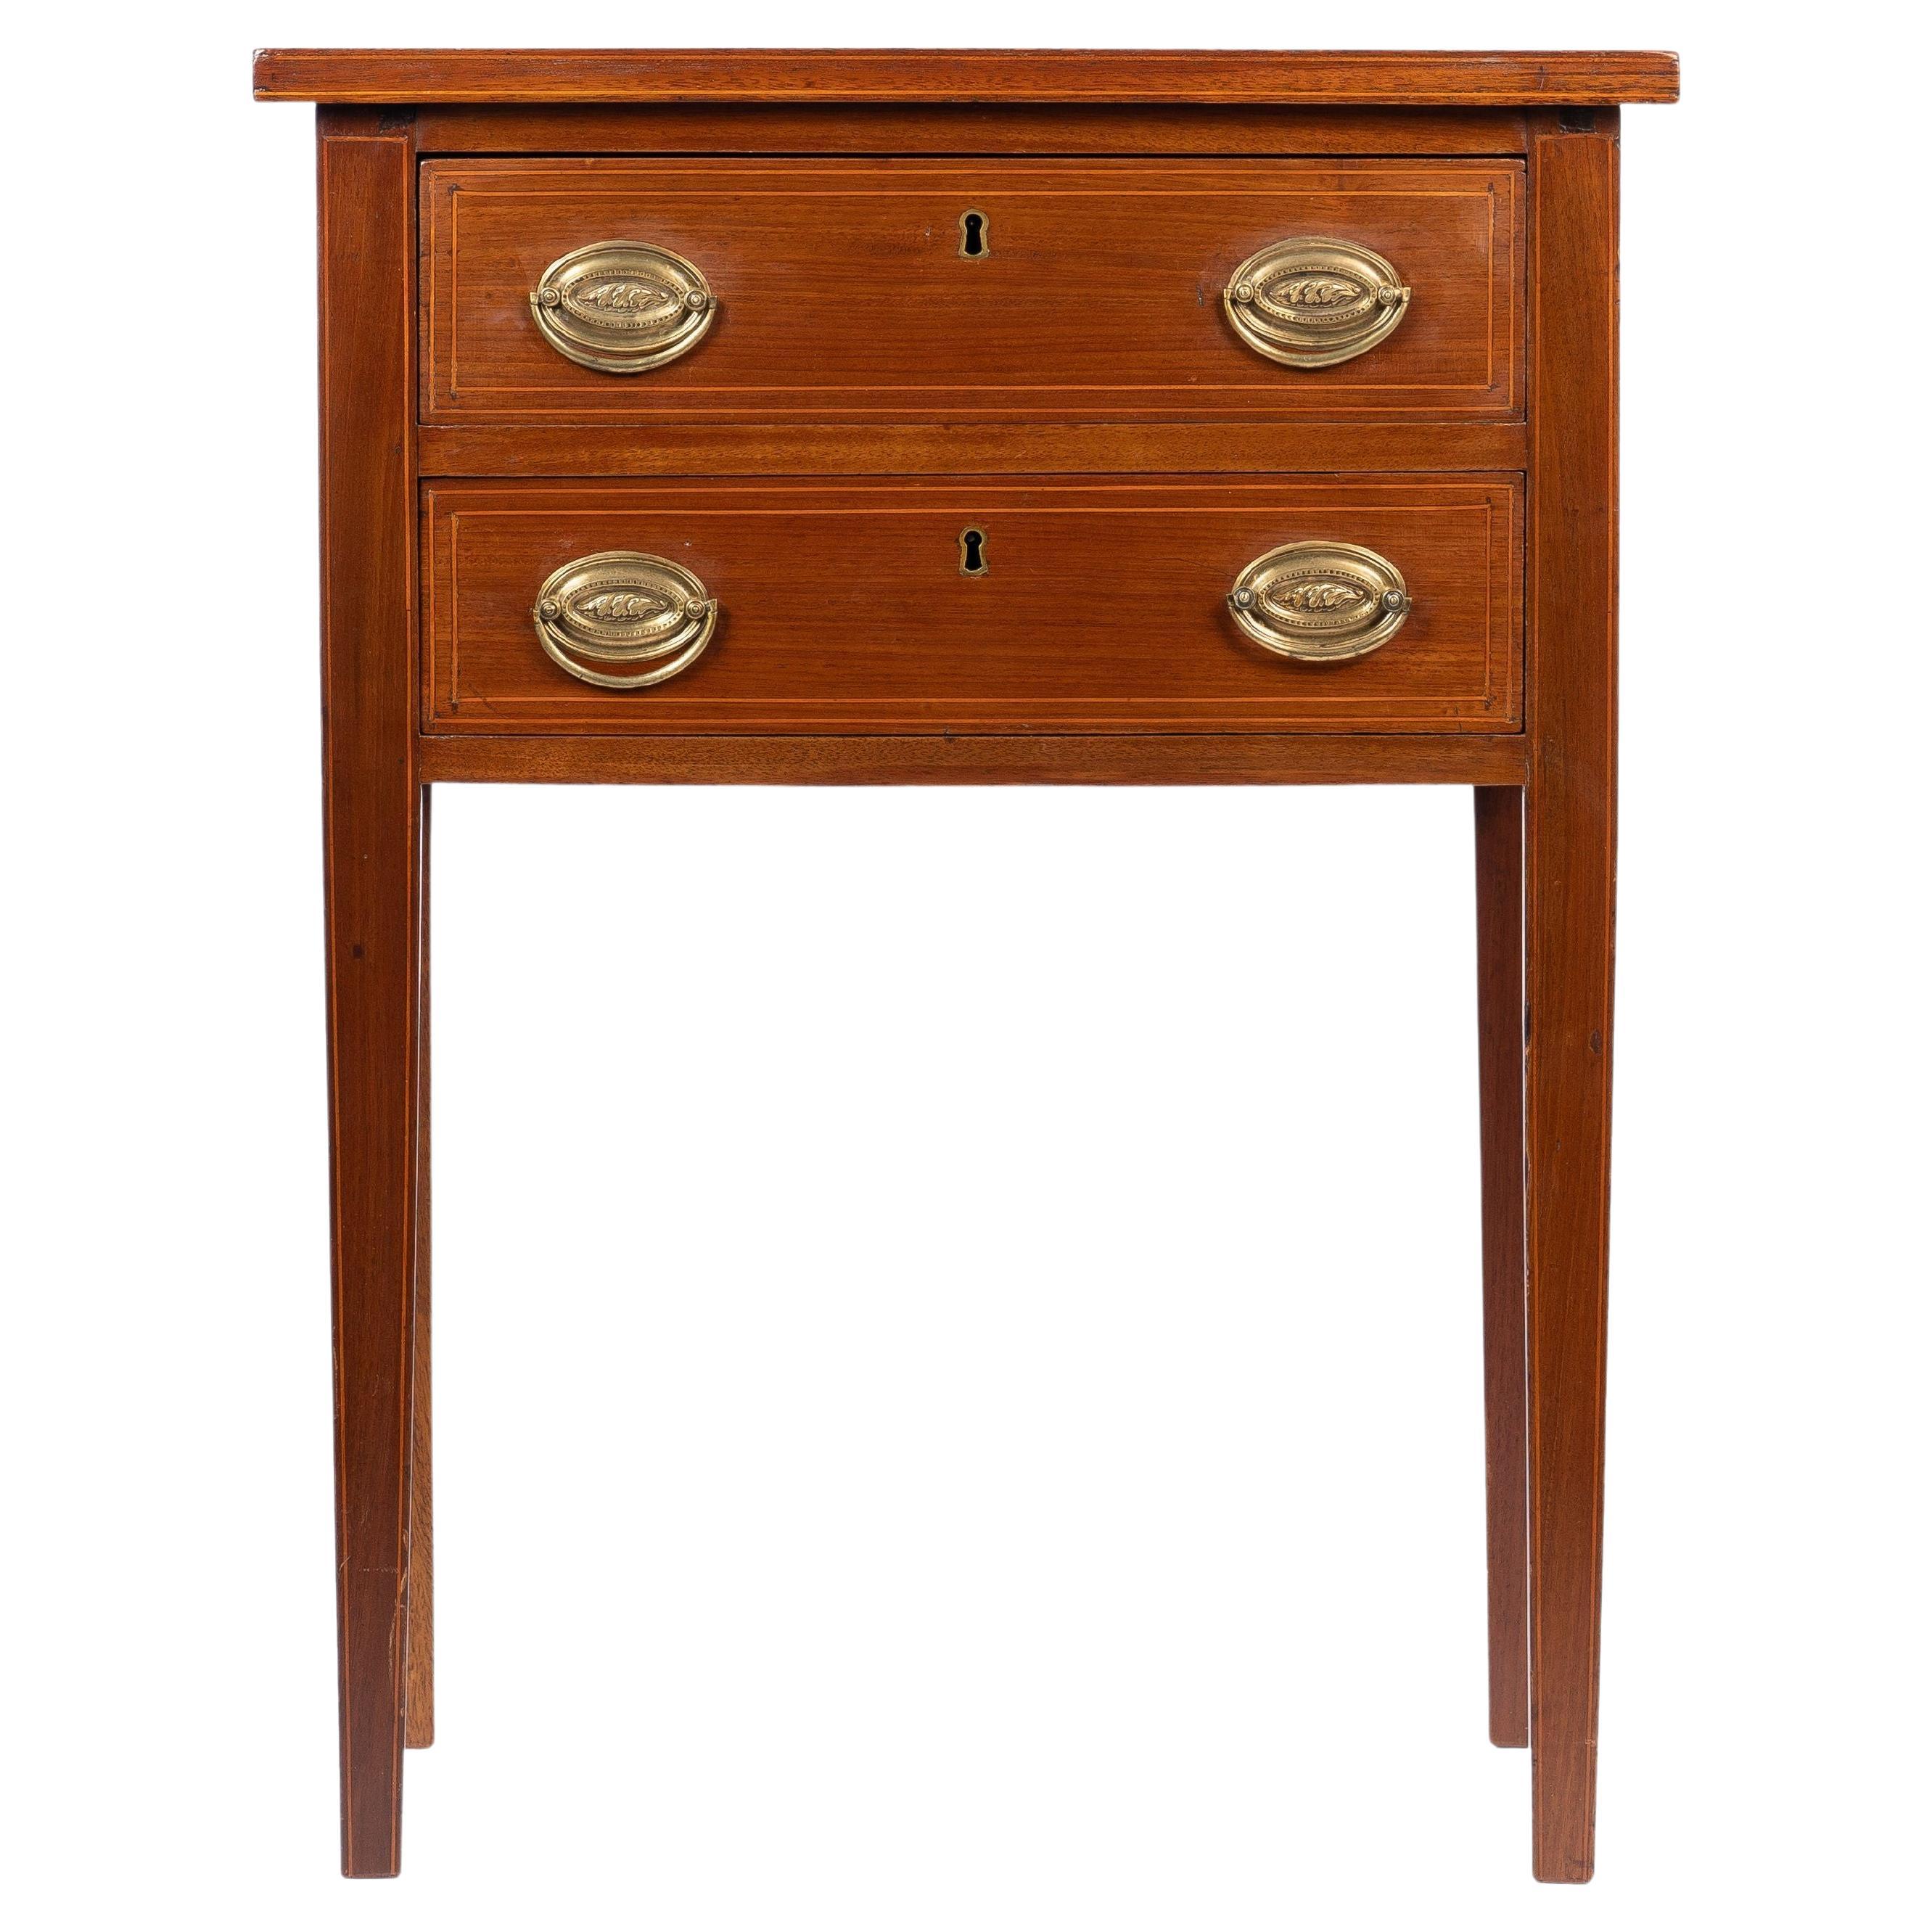 American Hepplewhite mahogany two drawer stand. There is a string inlay on the edge of the top, around the drawer fronts and down the front legs. The drawers are fitted with paired, oval stamped brass back plates, and cast brass posts and bail